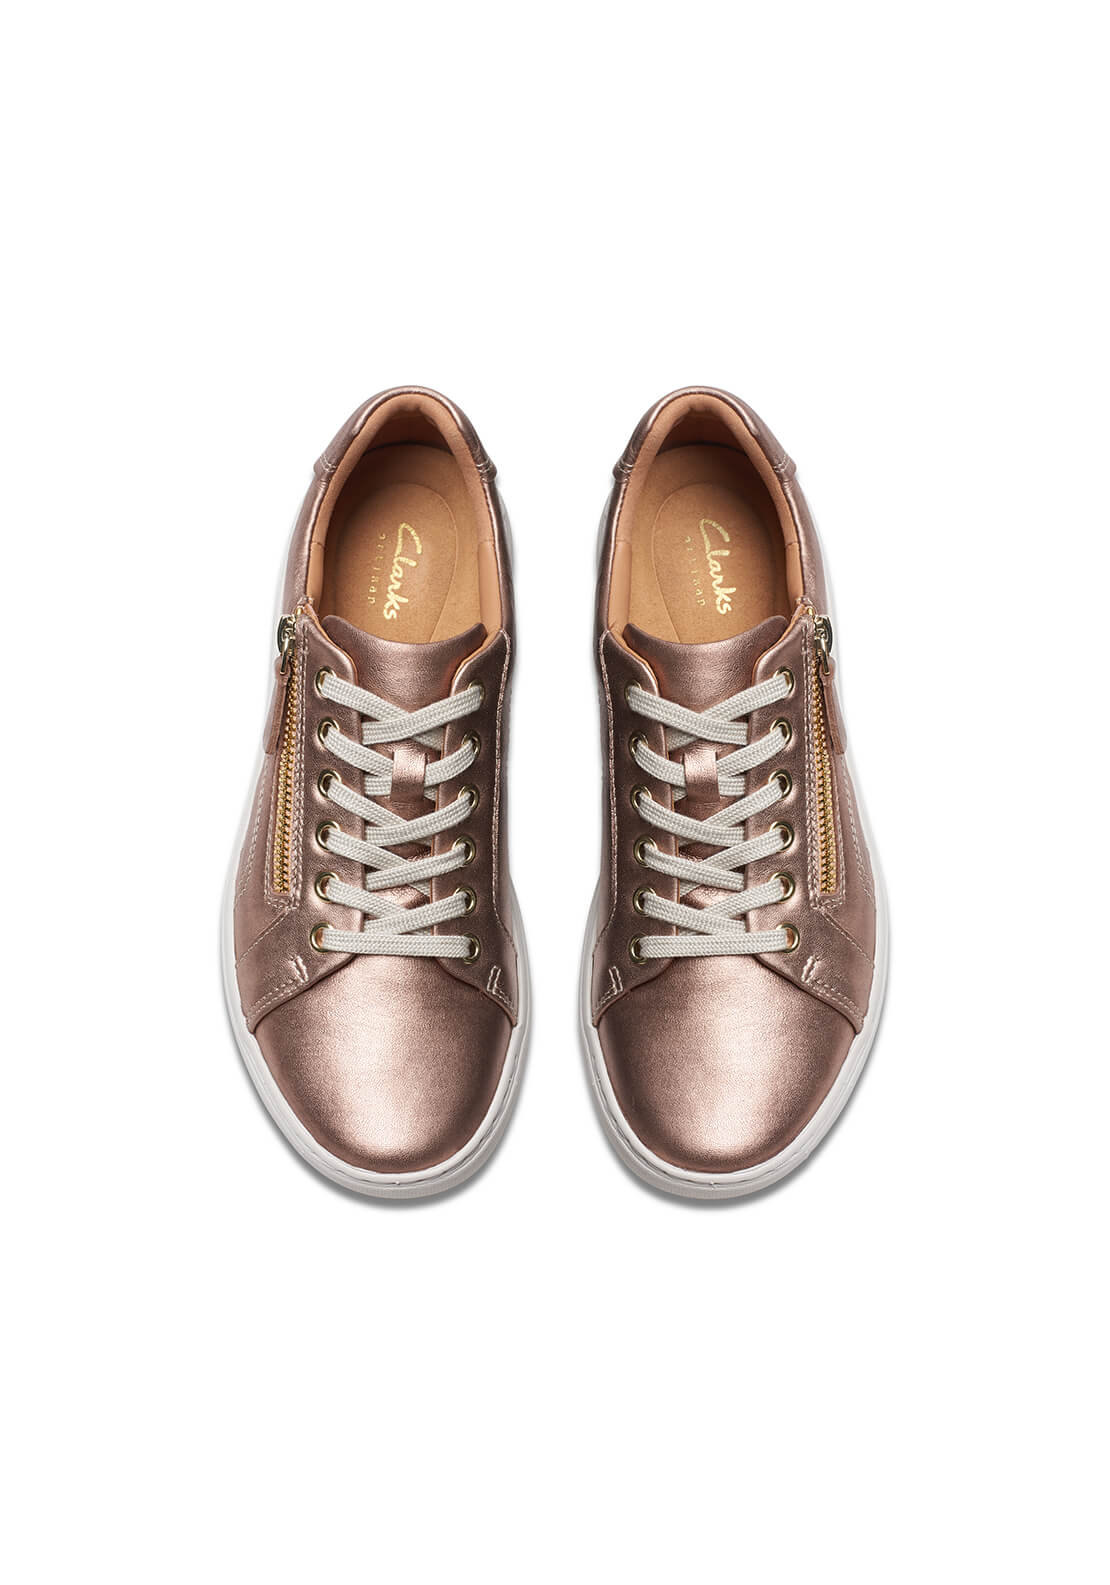 Clarks Nalle Lace Zip Trainer - Rose Gold 5 Shaws Department Stores